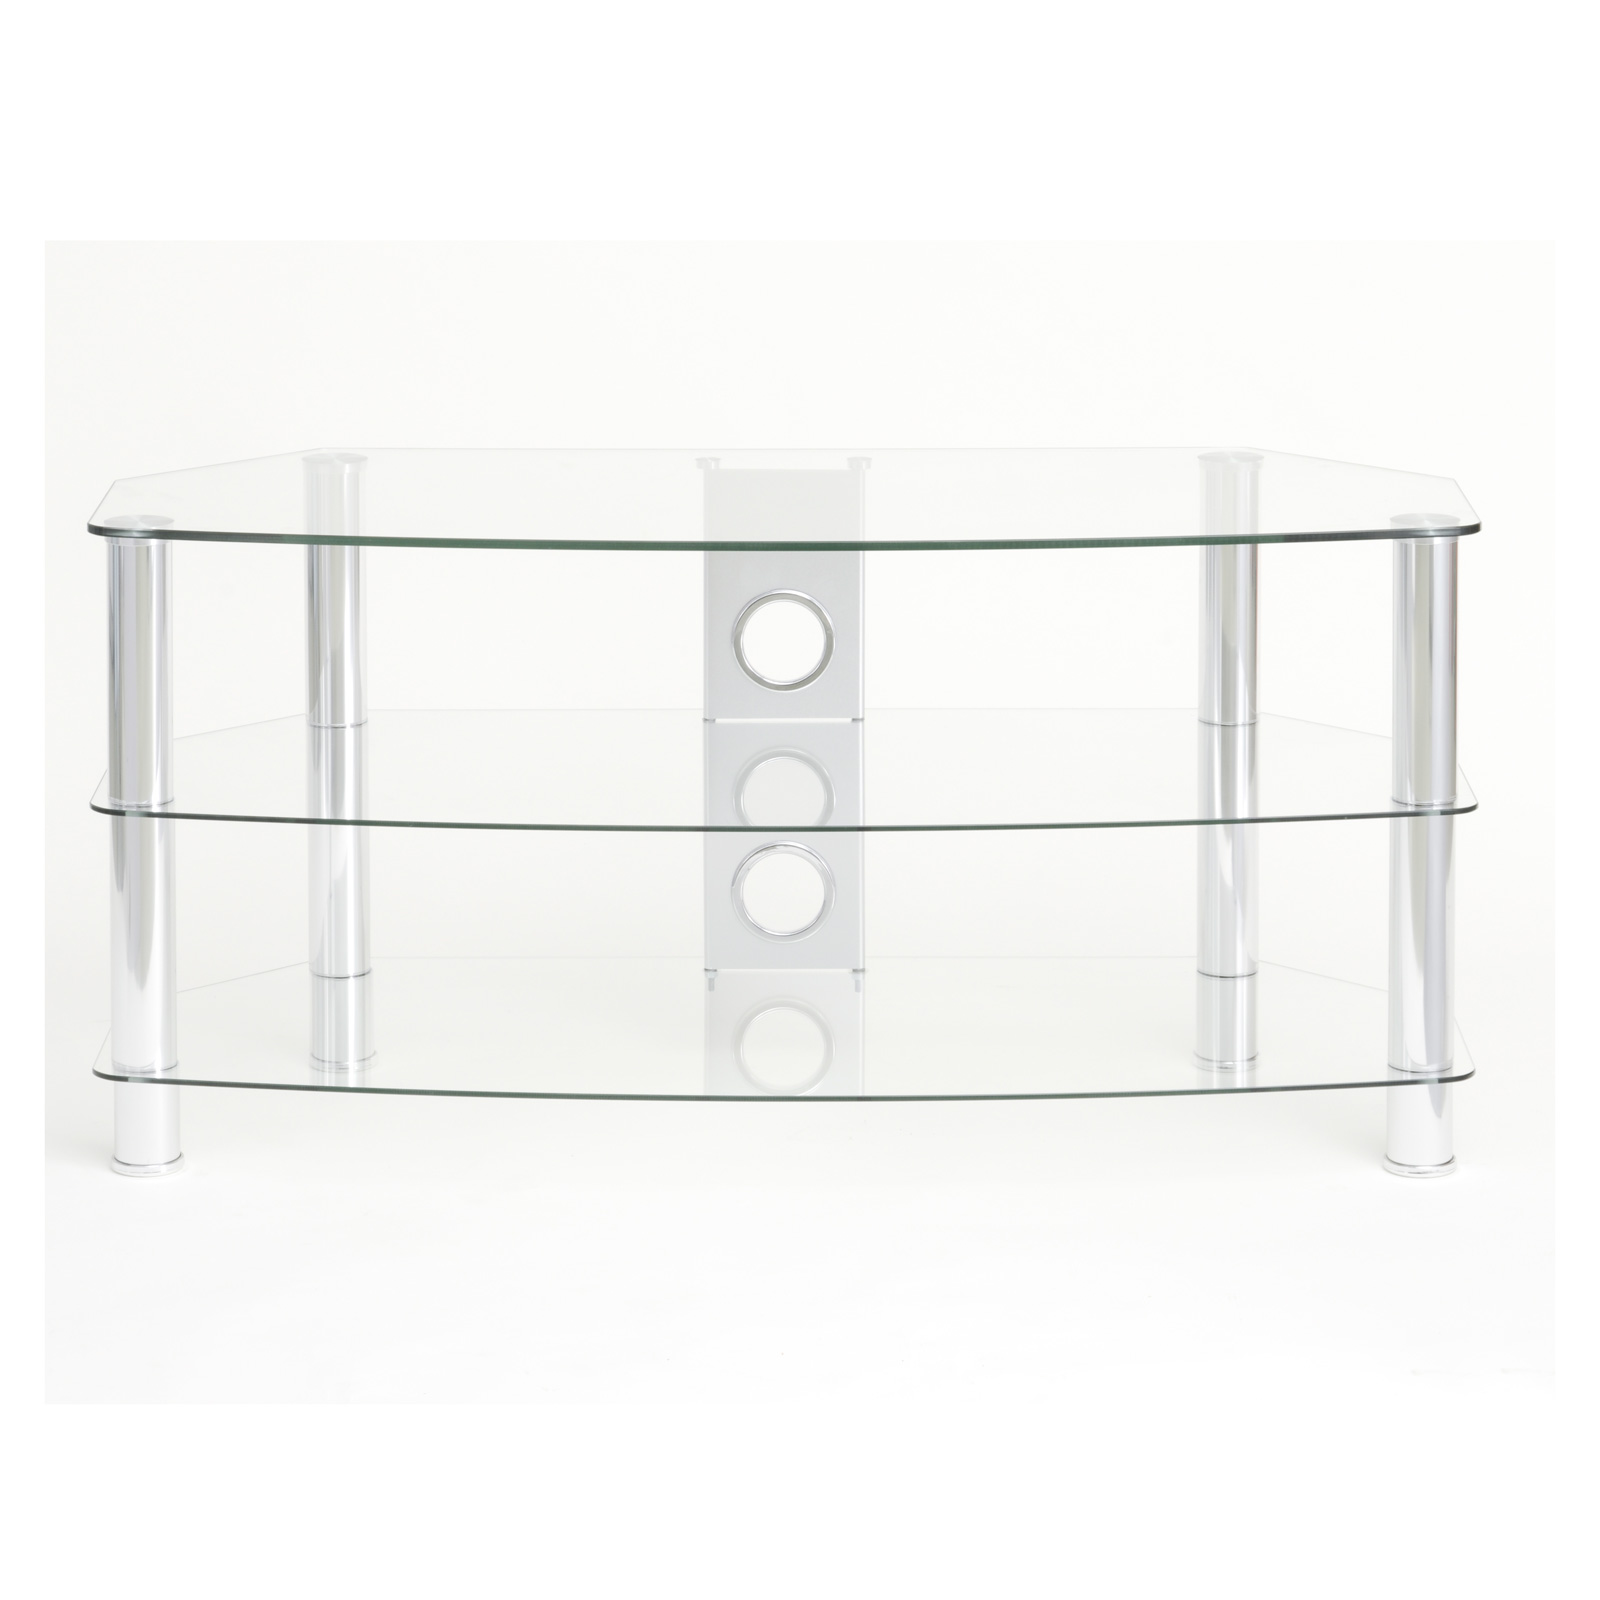 Image of TTAP C303C 800 3C Vantage Curve 800mm TV Stand in Chrome Clear Glass